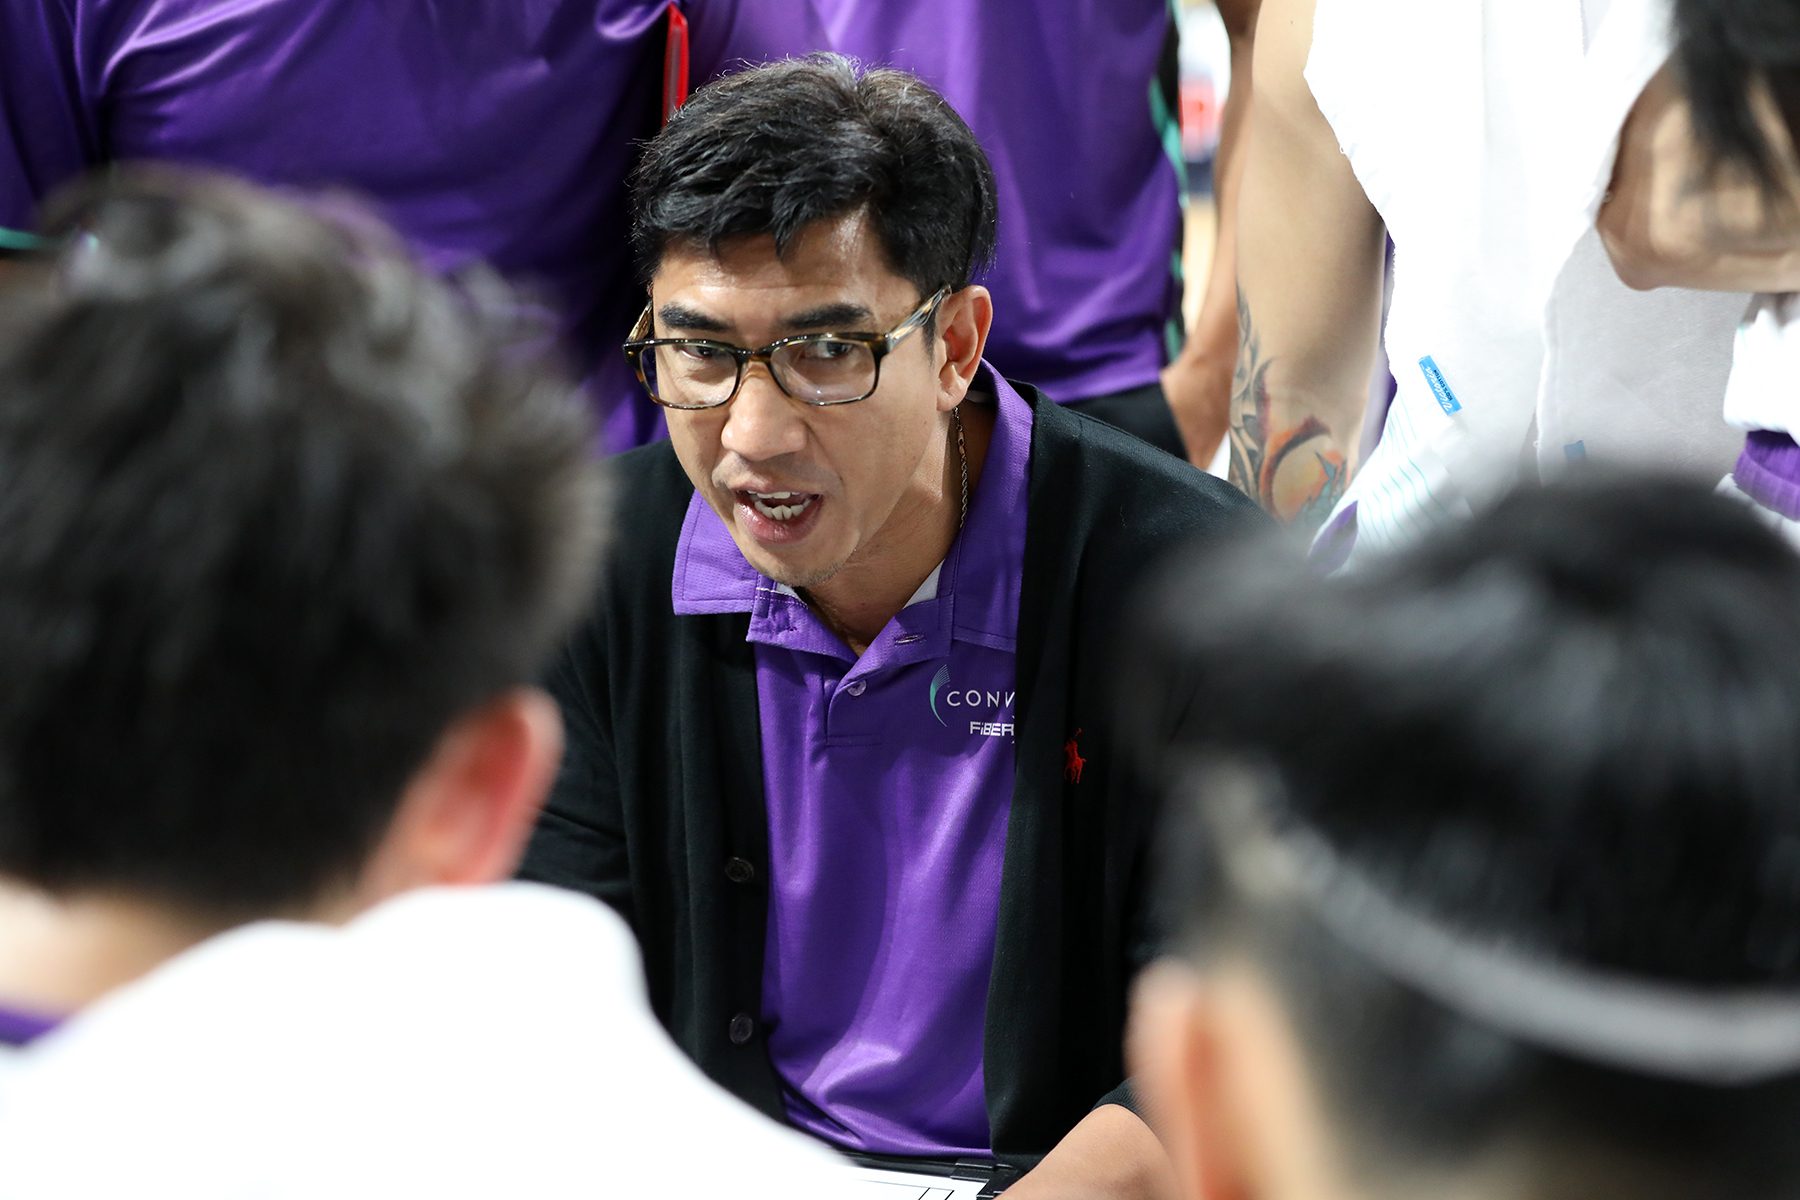 ‘Nervous’ Aldin Ayo shows signature game in pro coaching debut